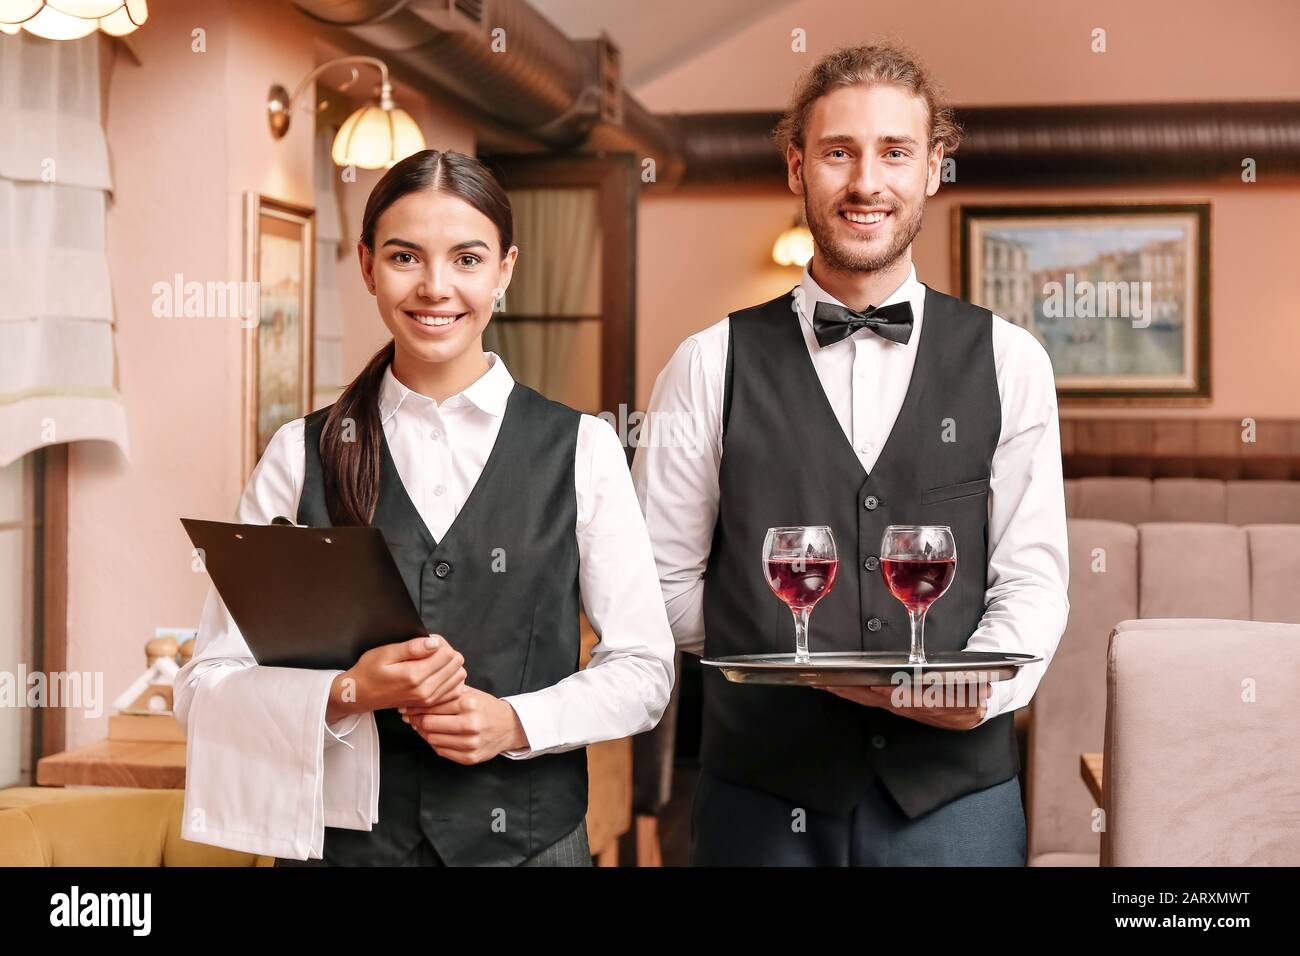 Portrait of young waiters in restaurant Stock Photo